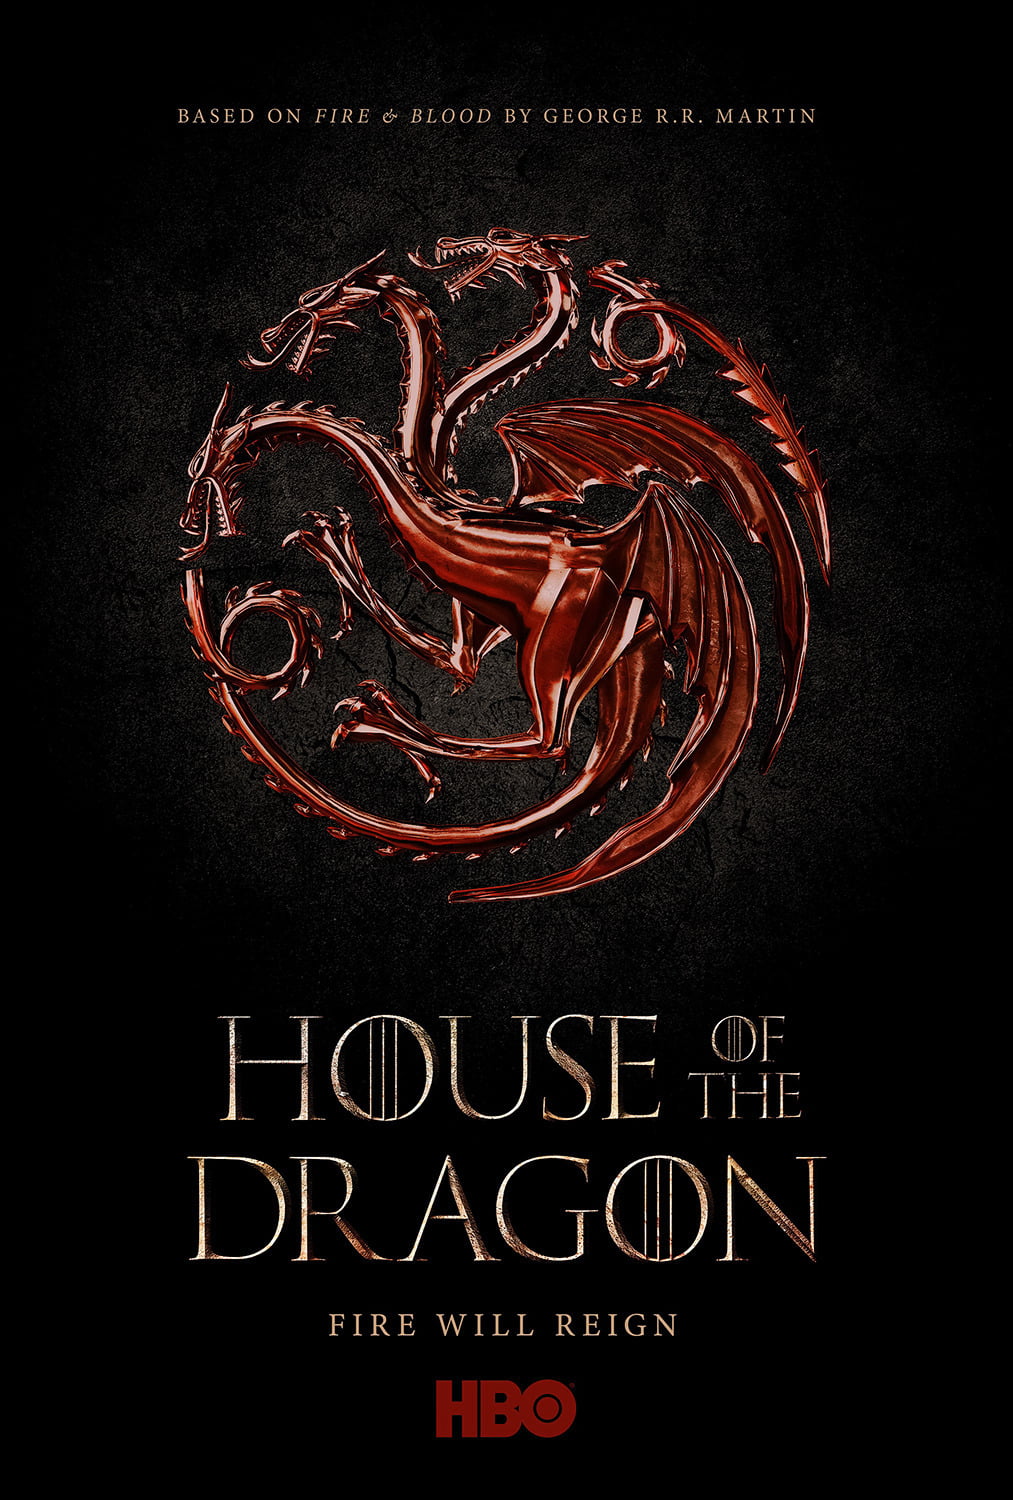 House of the dragon release, Game of thrones prequel release date cast plot teaser